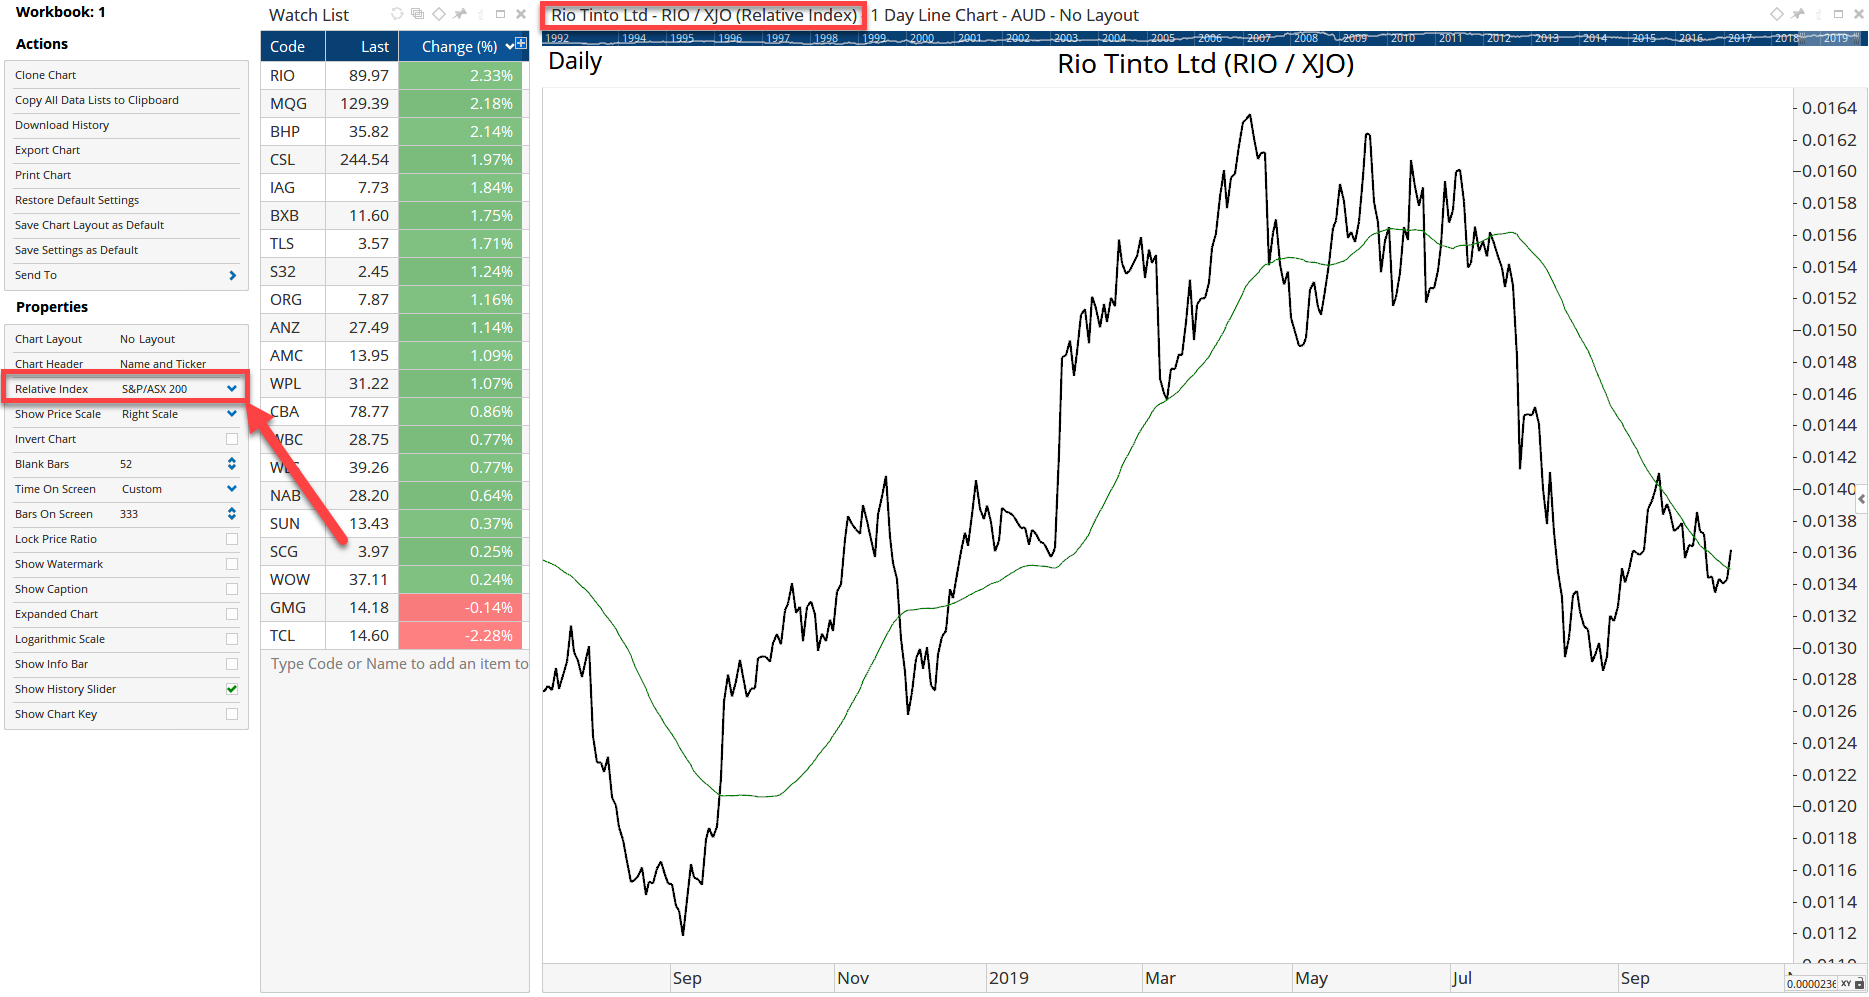 Relative Strength Charts